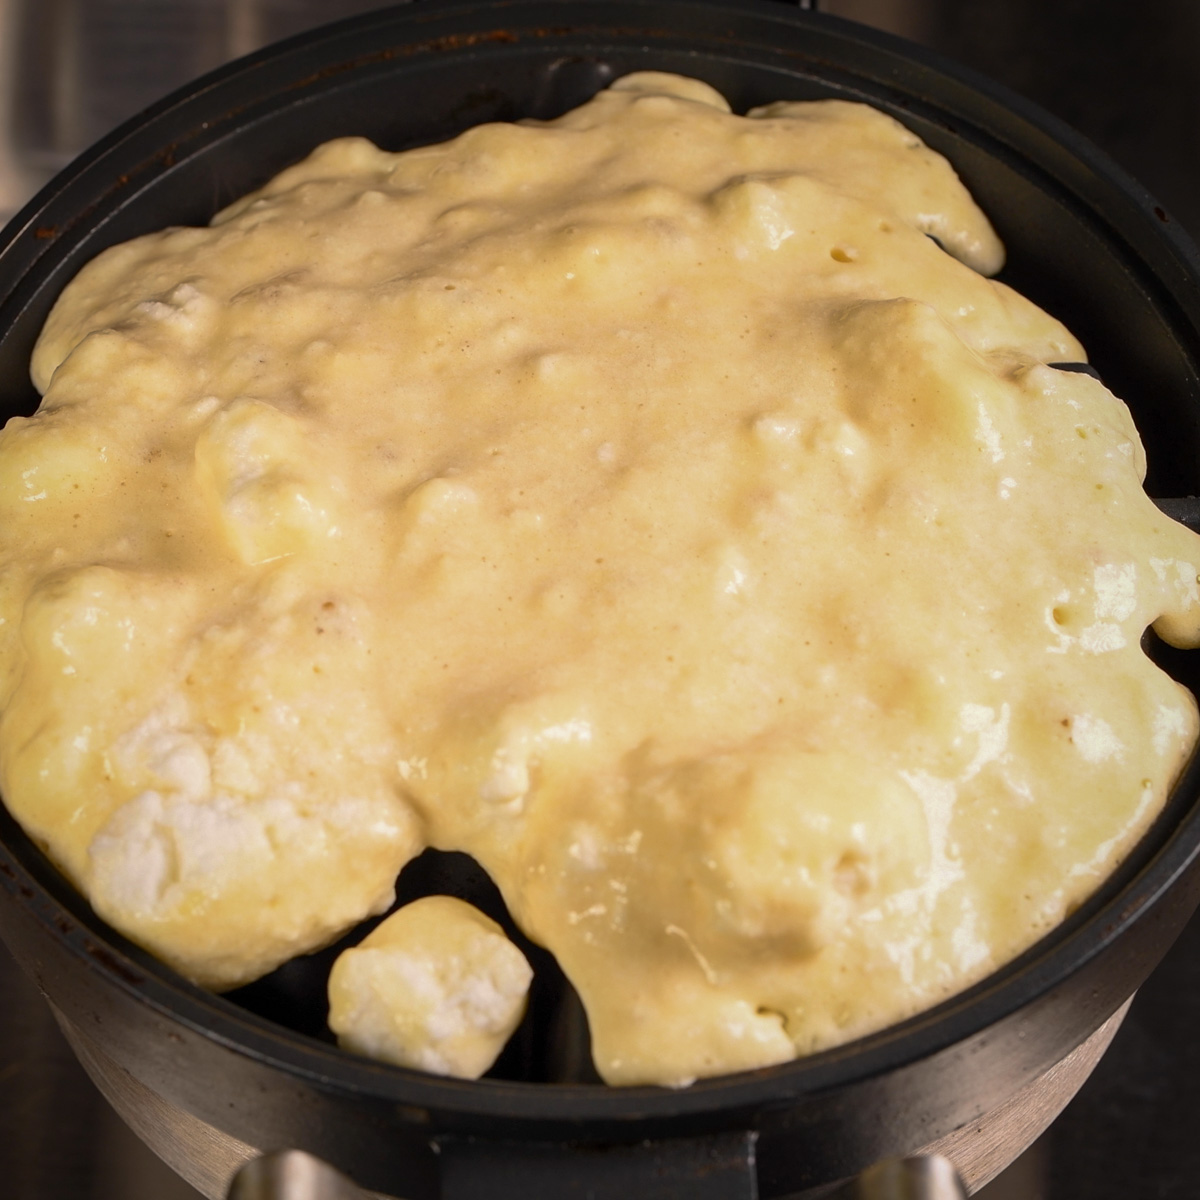 Add the batter to the waffle iron.